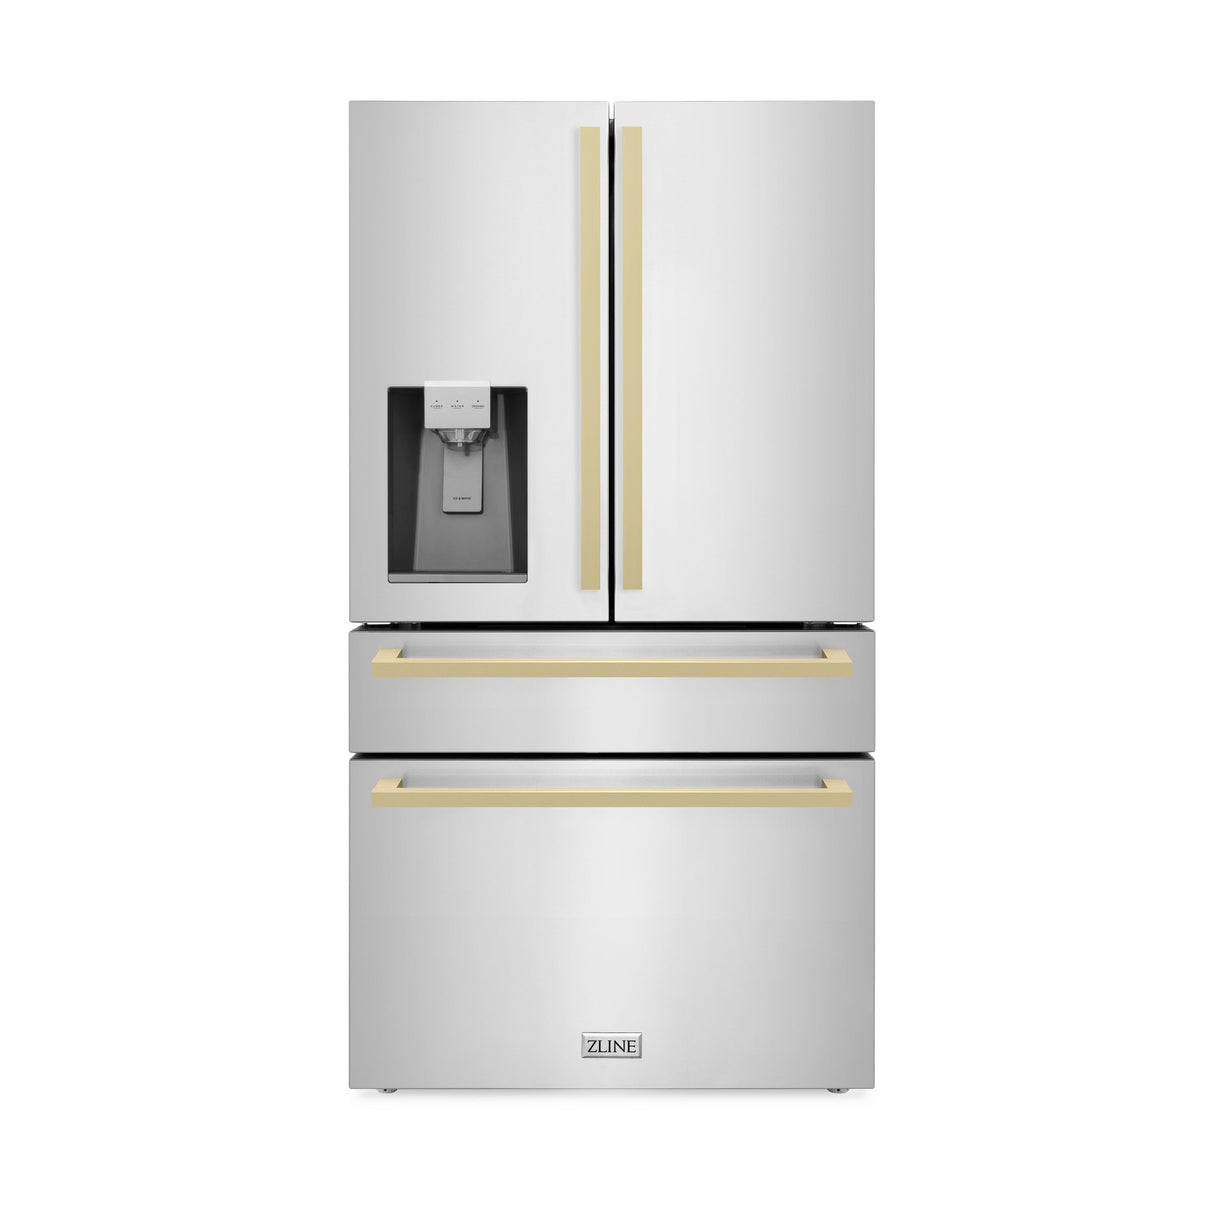 ZLINE Autograph Edition 36 in. 21.6 cu. ft 4-Door French Door Refrigerator with Water and Ice Dispenser in Stainless Steel with Champagne Bronze Square Handles (RFMZ-W-36-FCB)